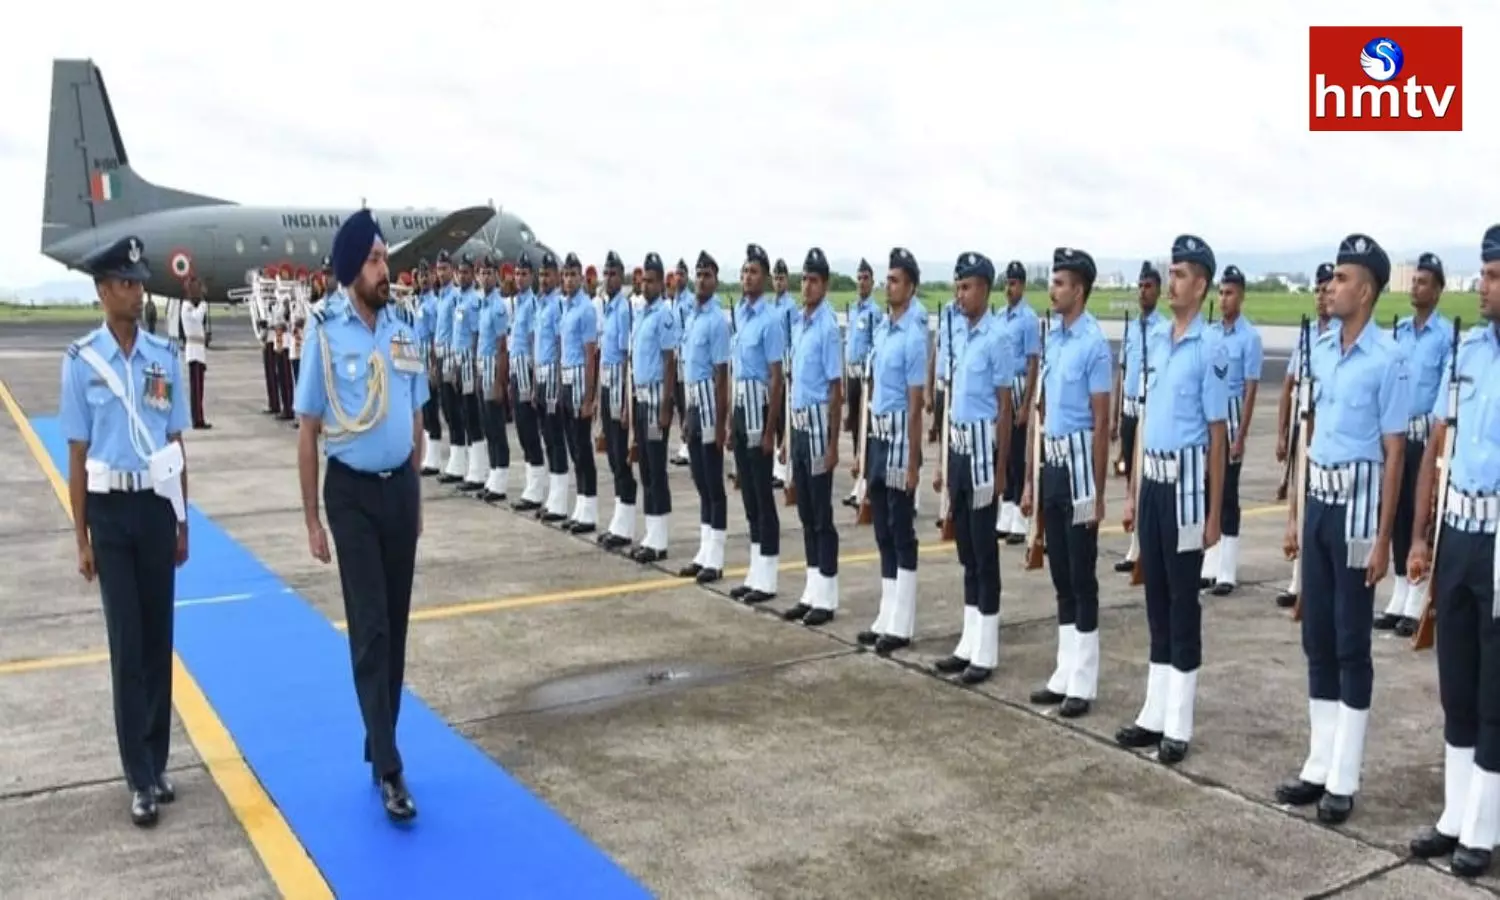 Indian Air Force Angiveer Vayu recruitment 2022 check for all details